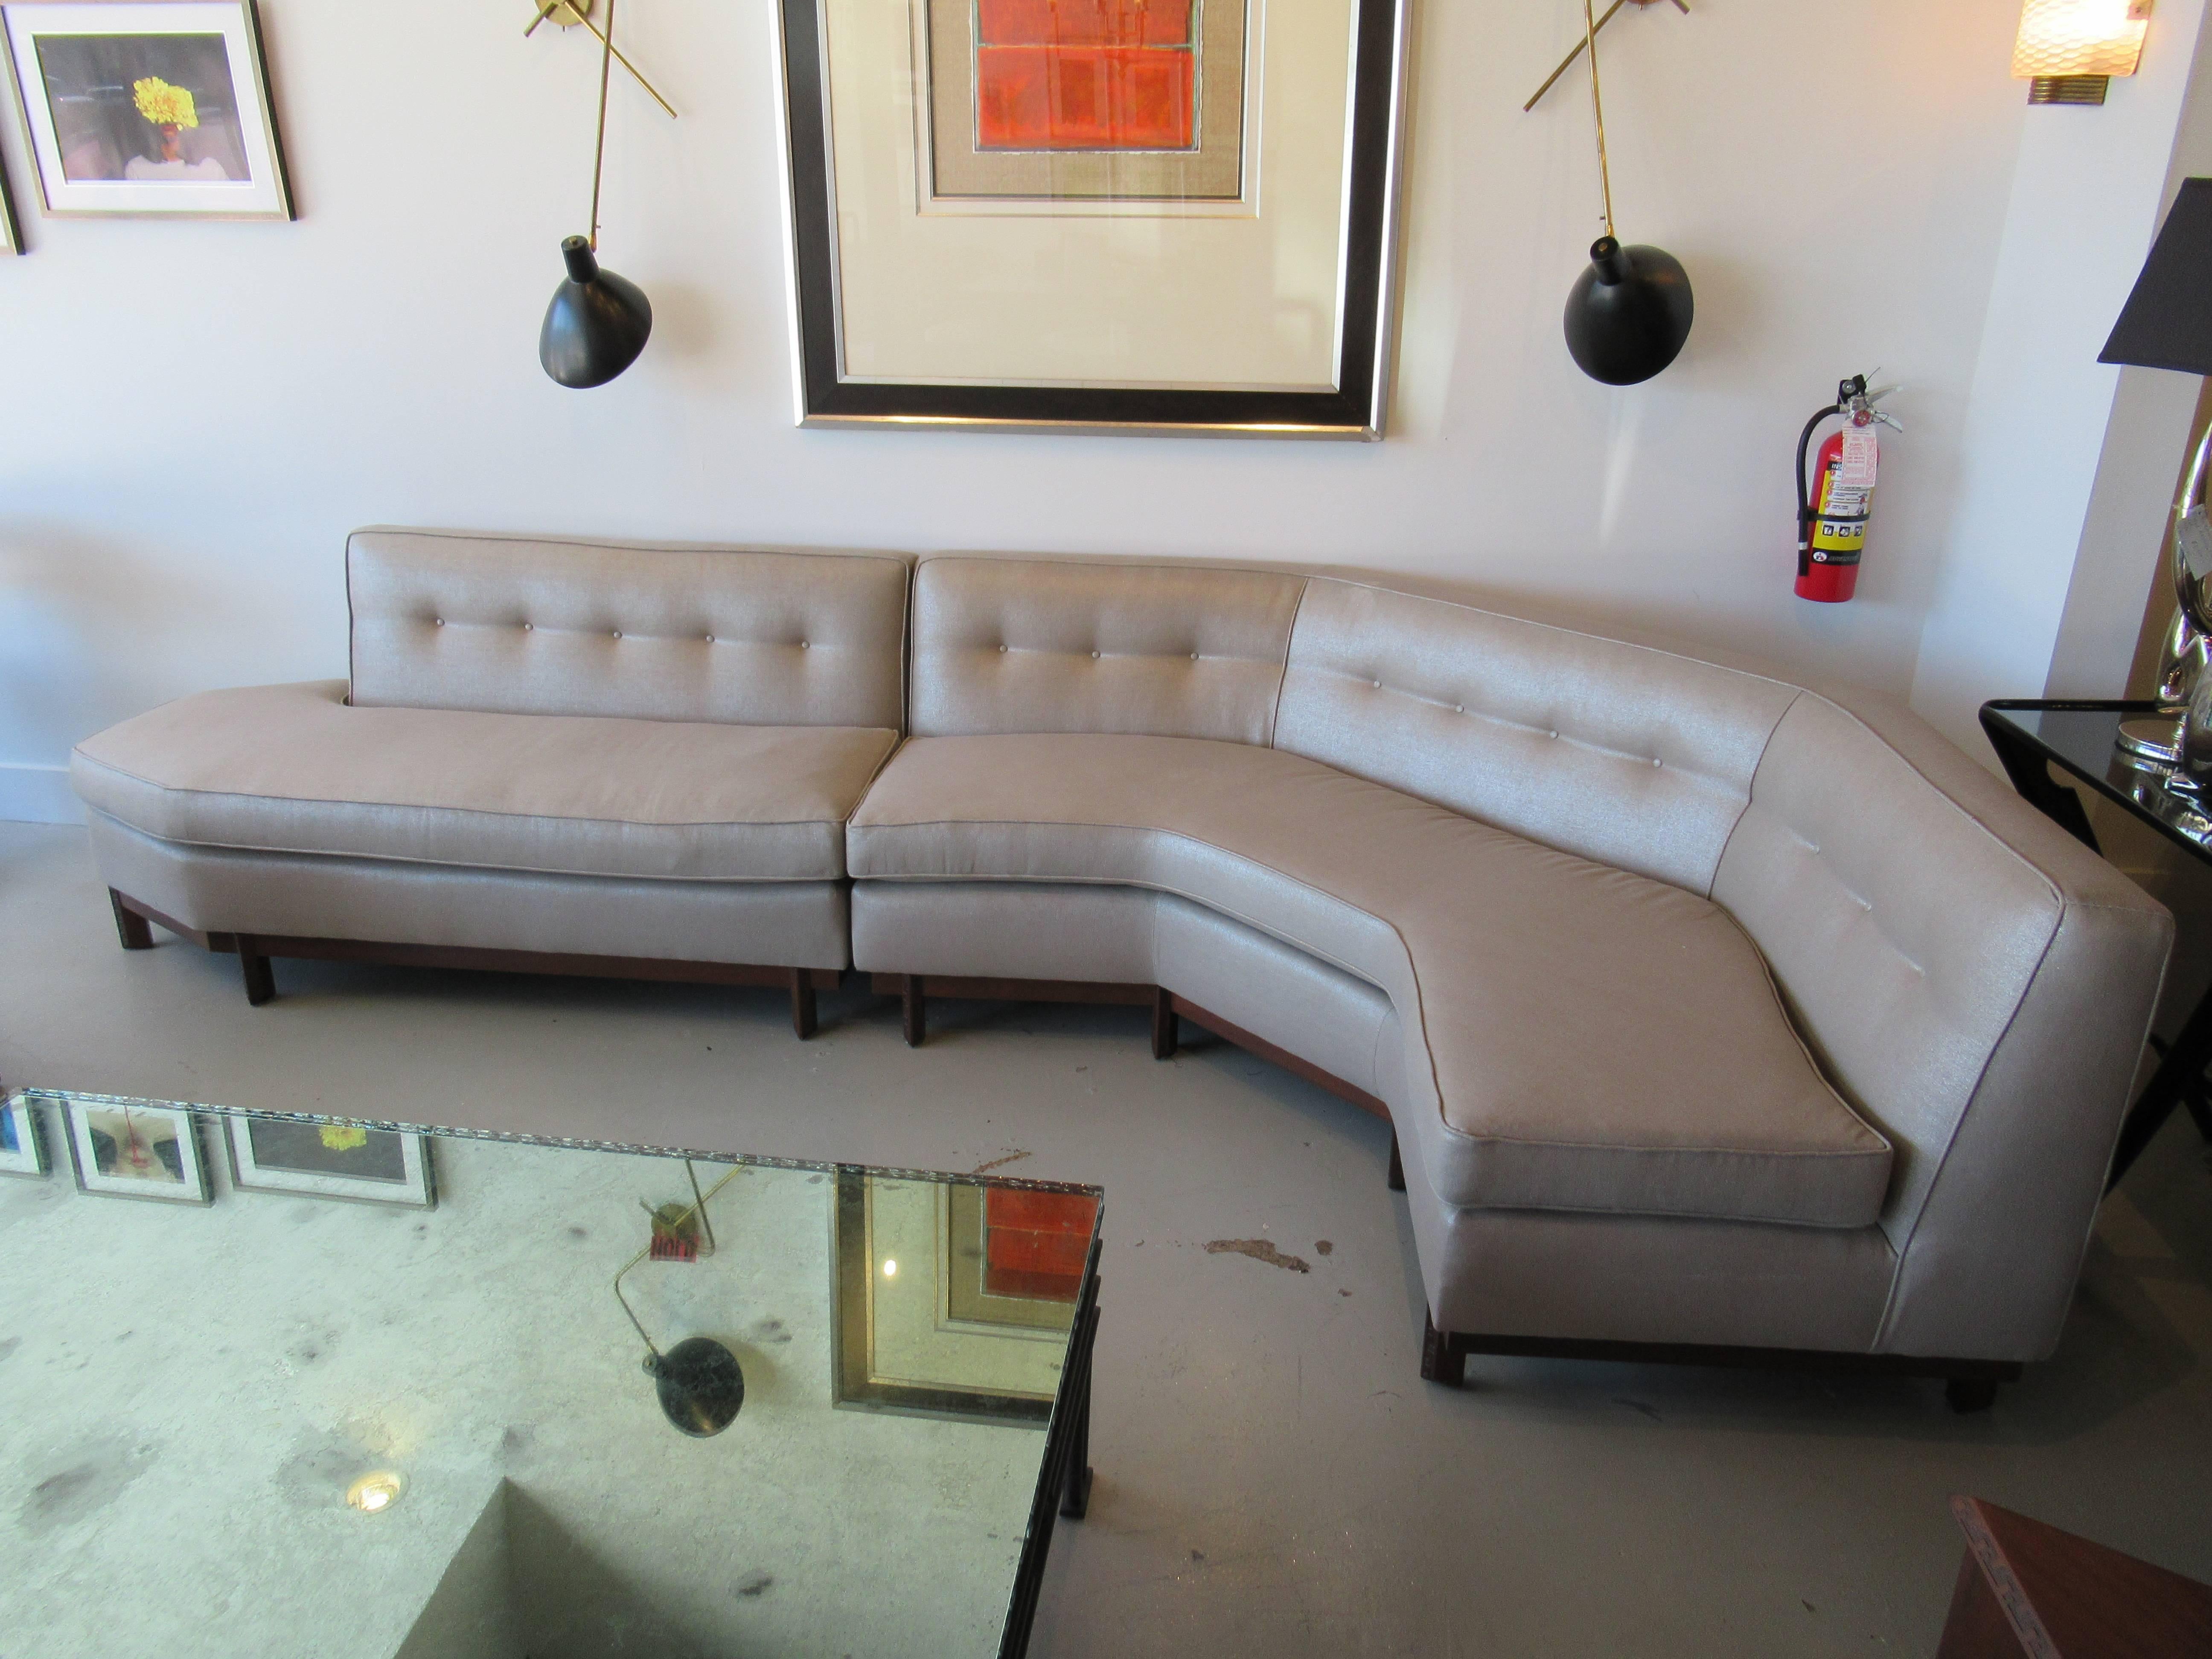 American modern upholstered sectional sofa, 1950s, Frank Lloyd Wright for Heritage Henredon. Taliesin collection.